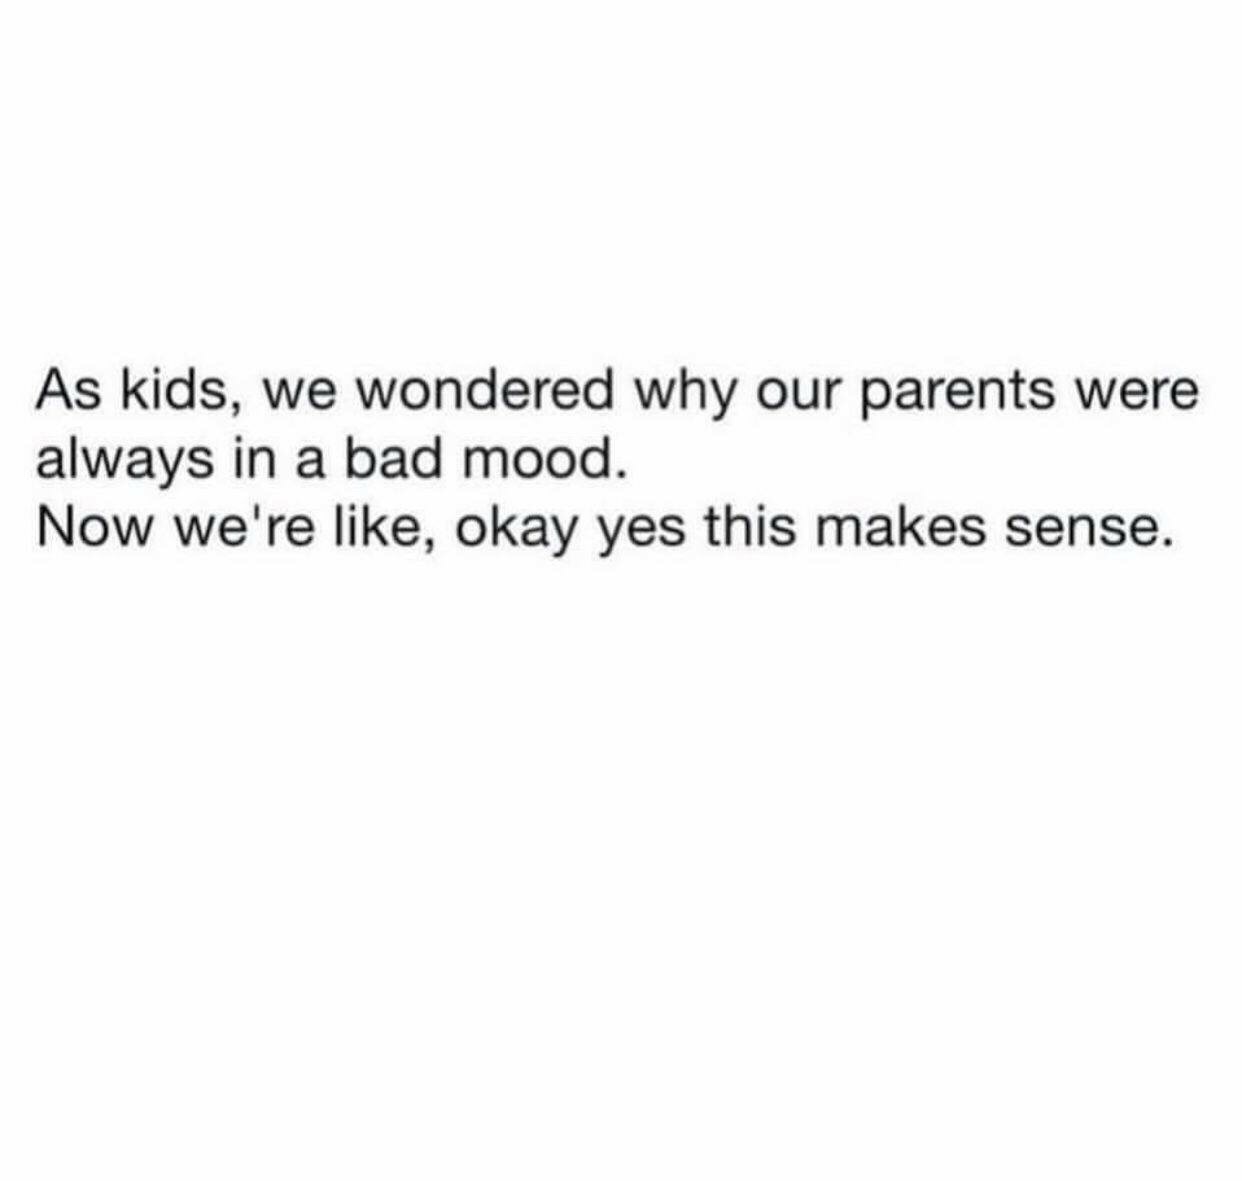 document - As kids, we wondered why our parents were always in a bad mood. Now we're , okay yes this makes sense.